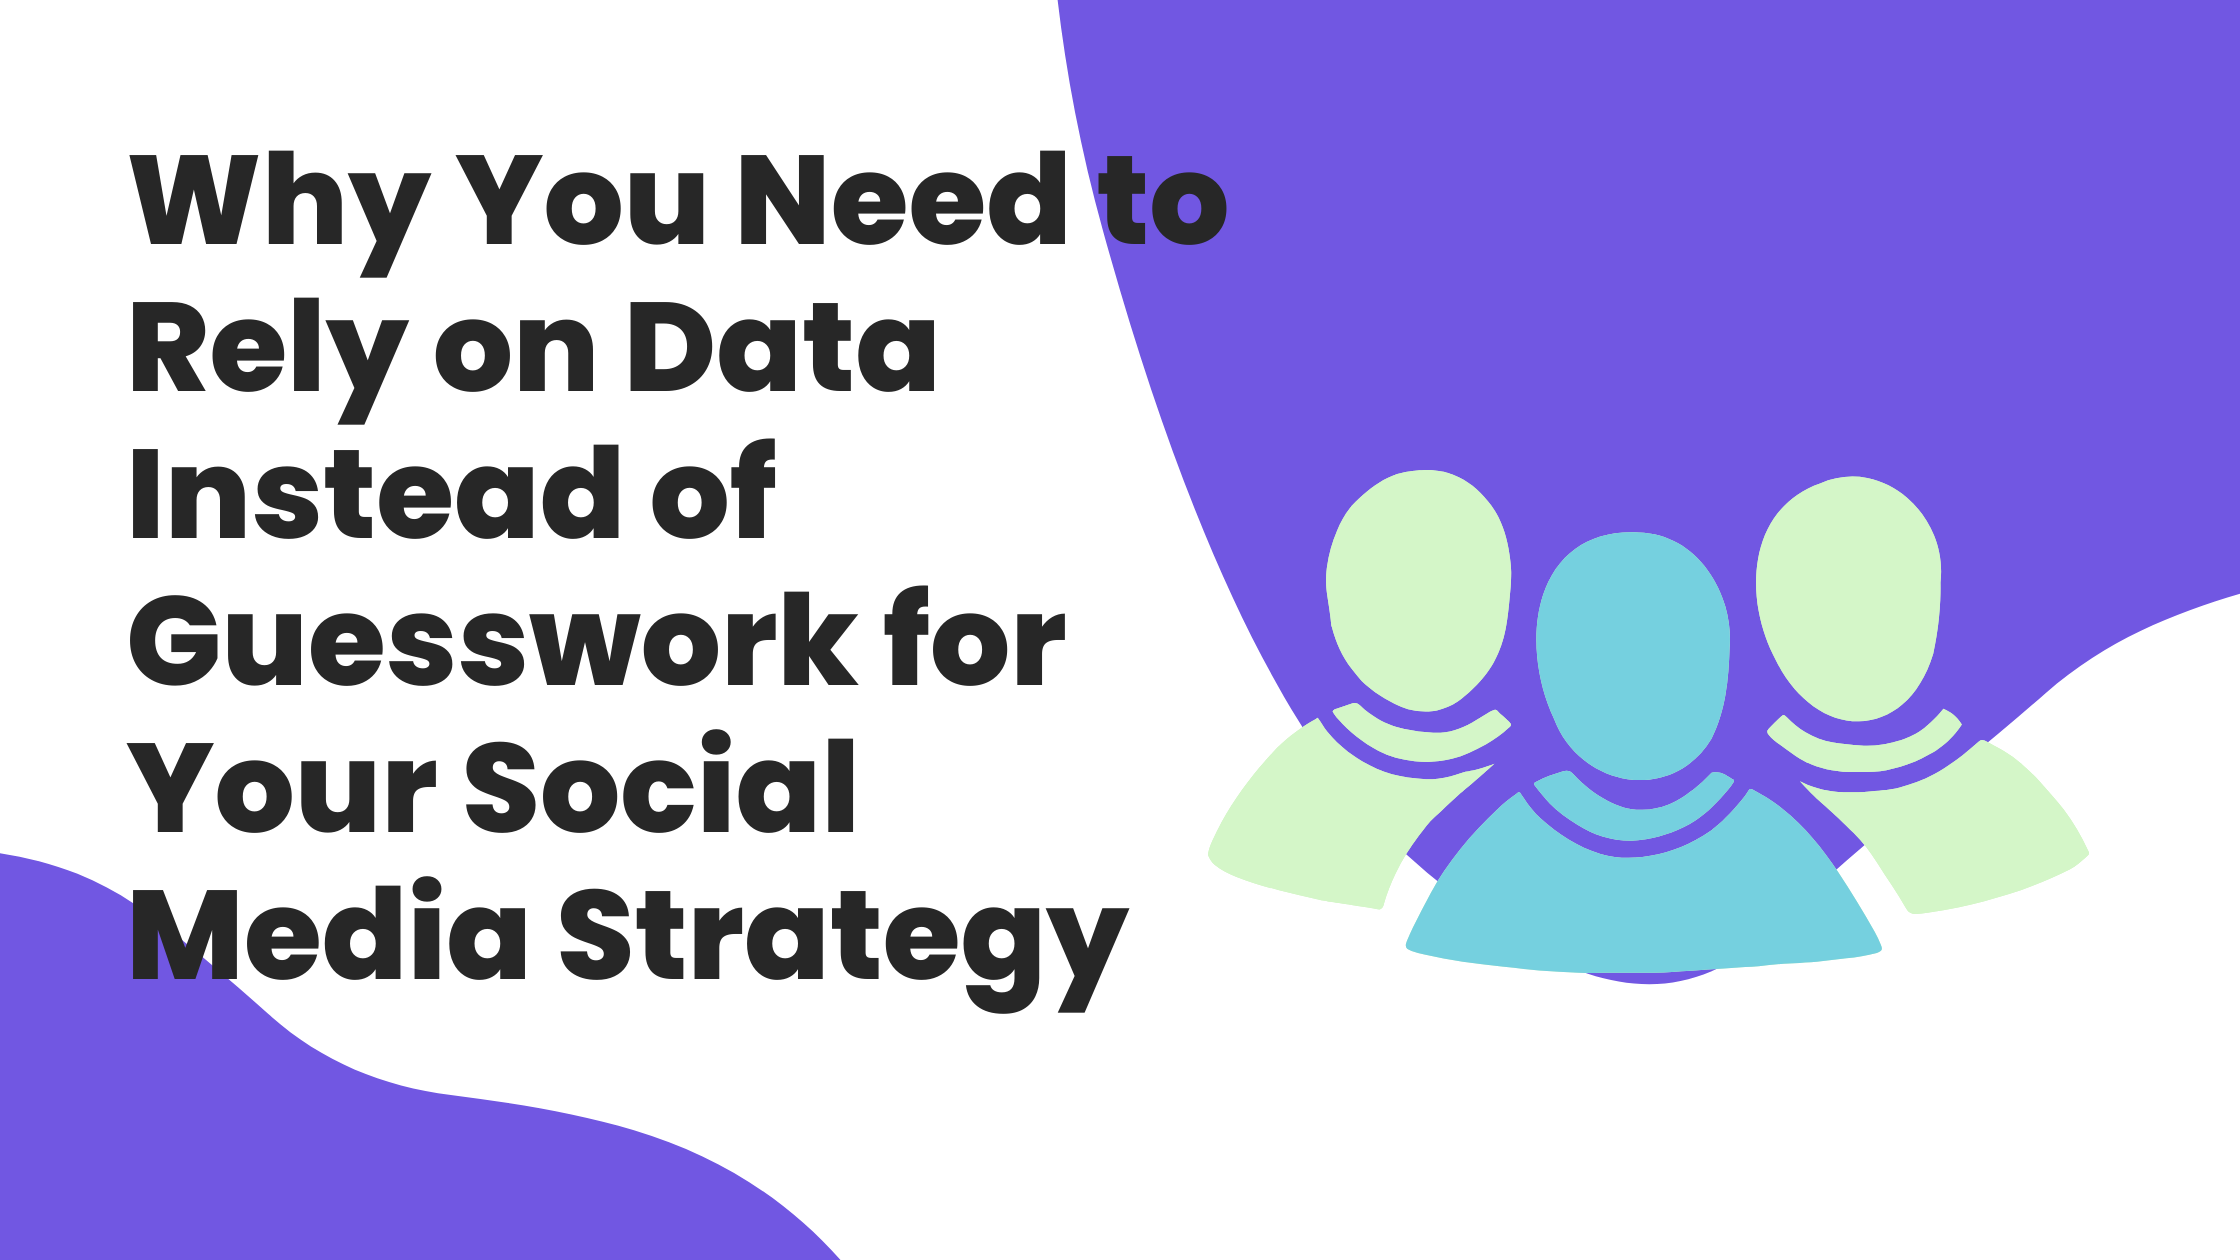 Why You Need to Rely on Data Instead of Guesswork for Your Social Media Strategy